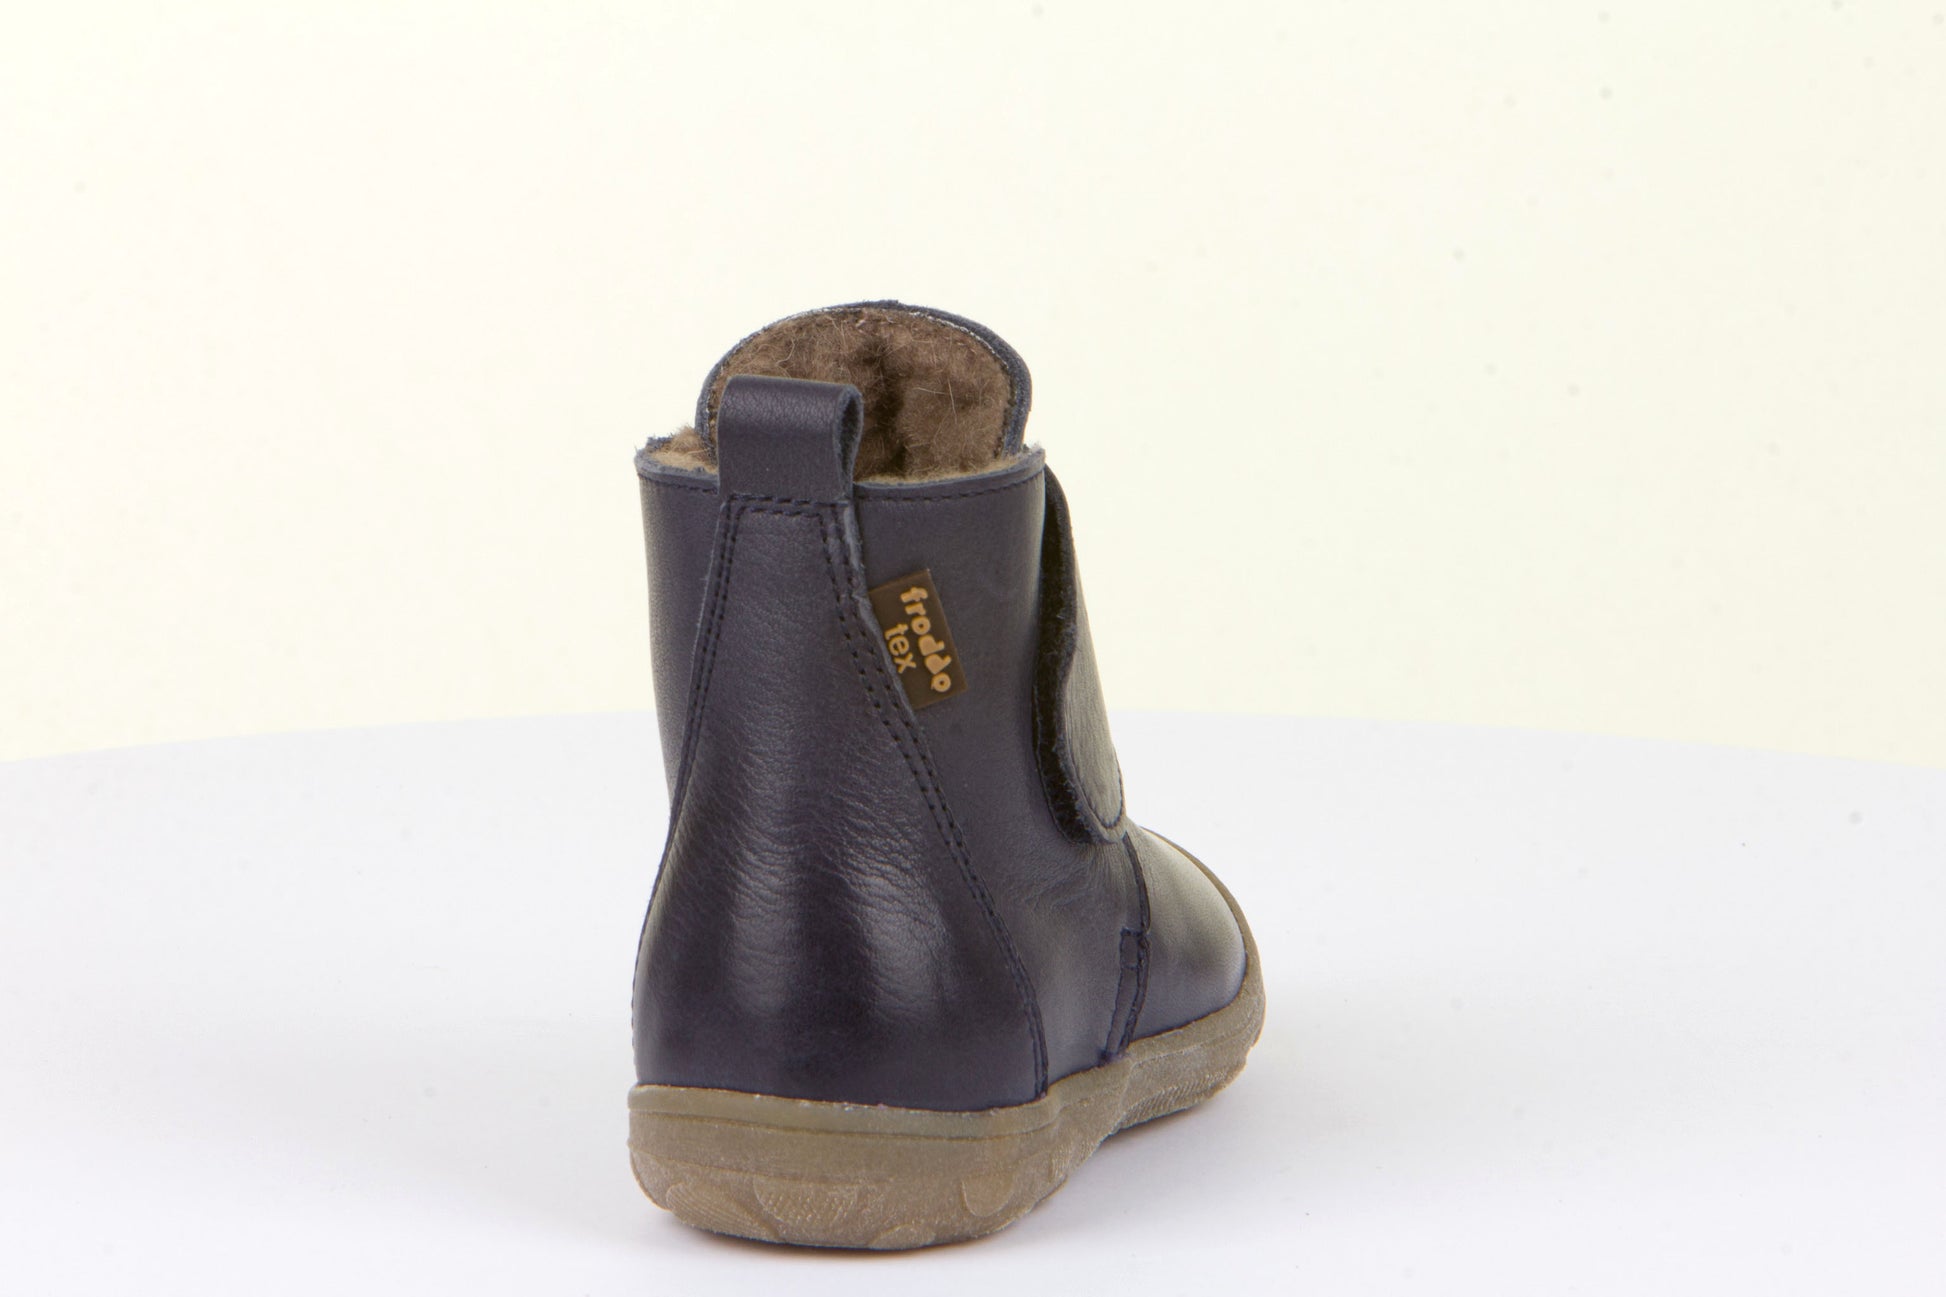 A unisex waterproof boot by Froddo, style Kart Tex Boot G2160071 in Navy. Back view.